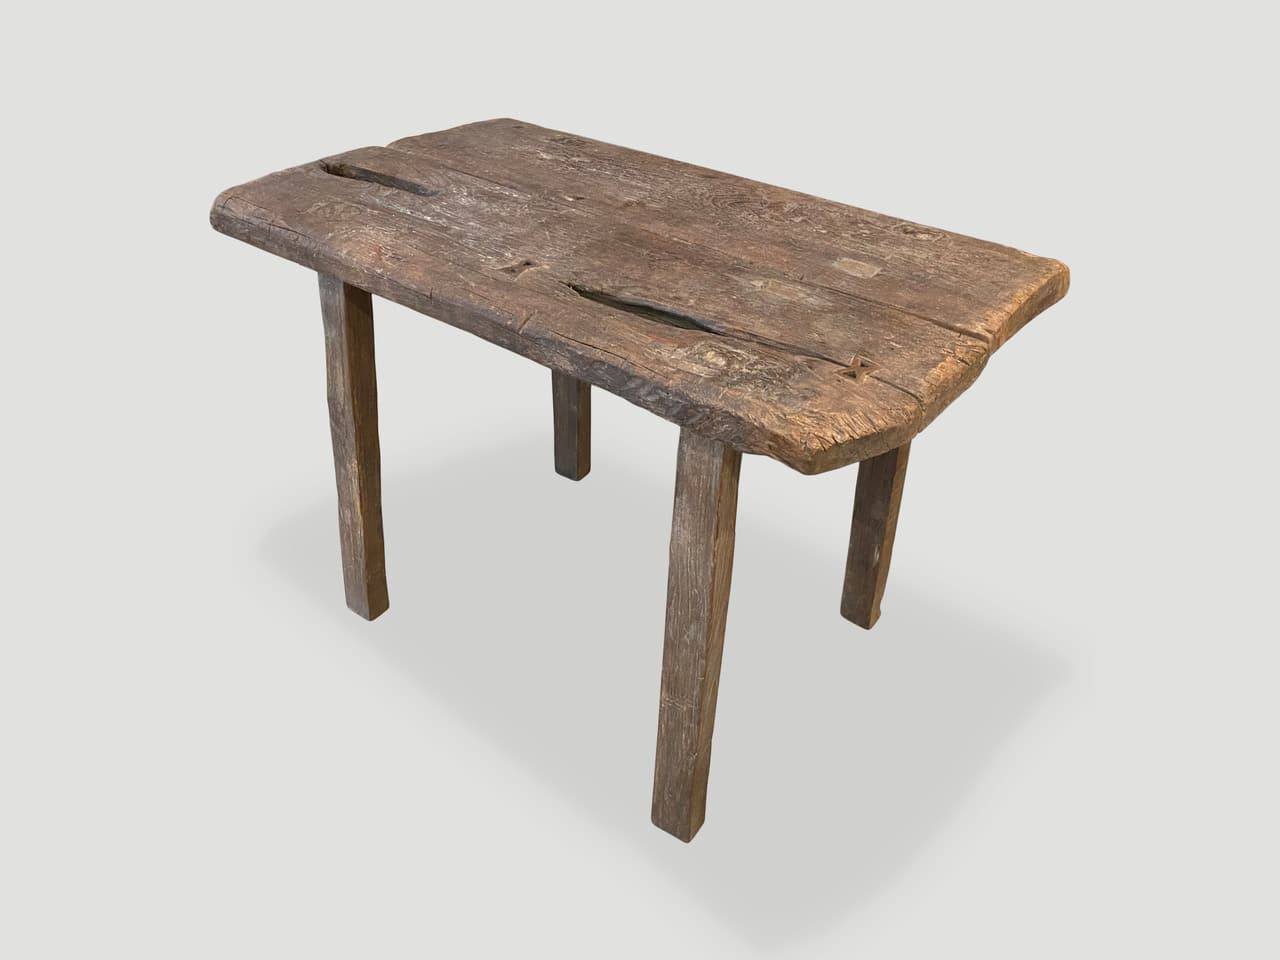 Wabi Sabi side table or small console table